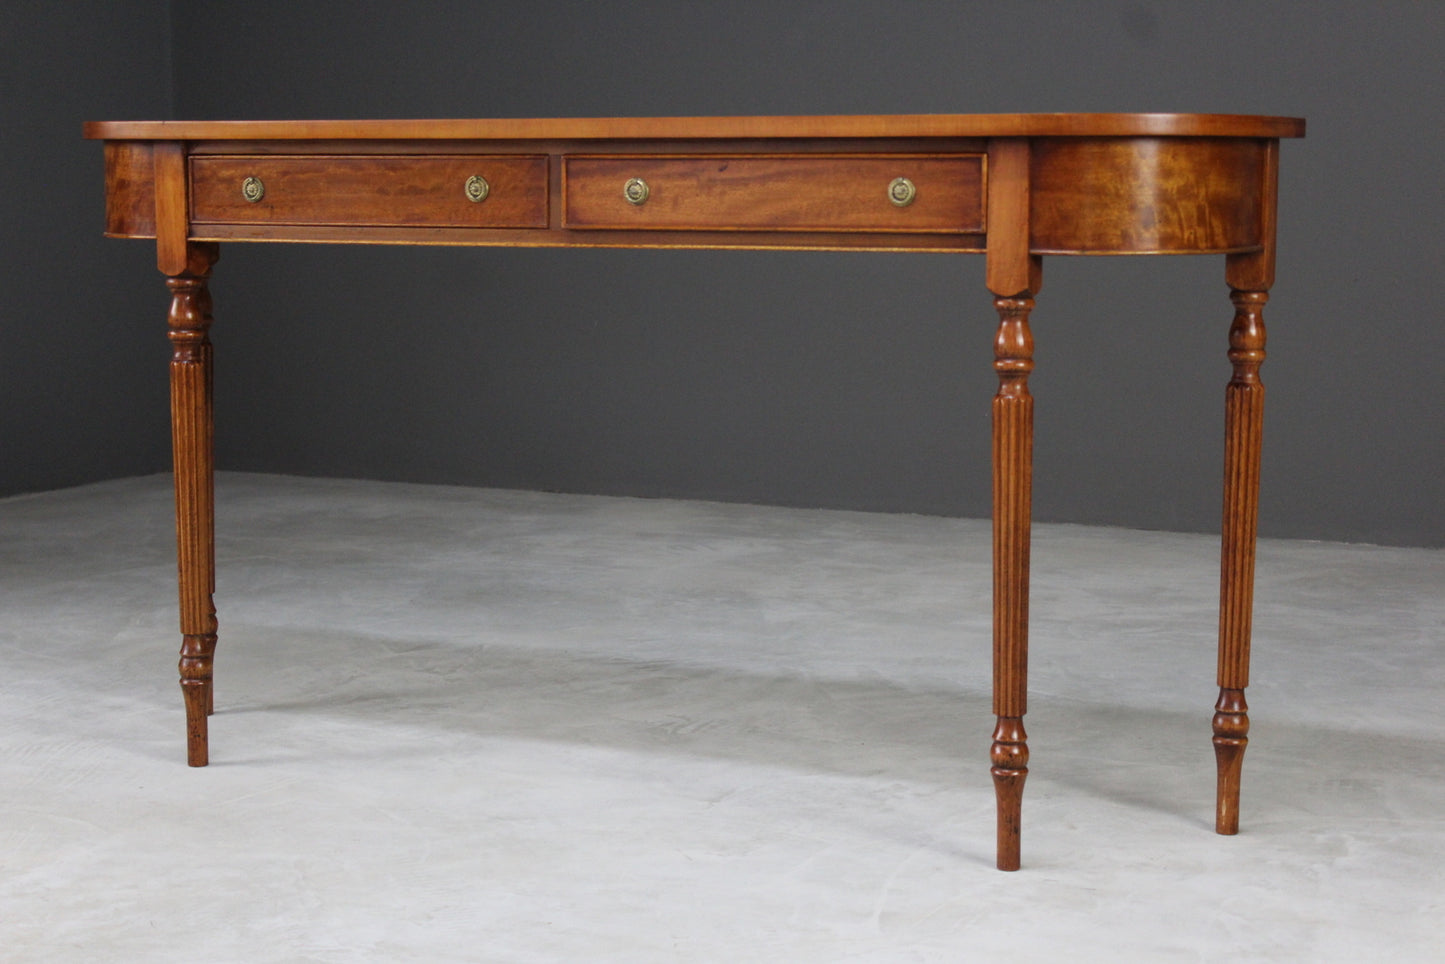 Antique Style Narrow Hall Table - Kernow Furniture